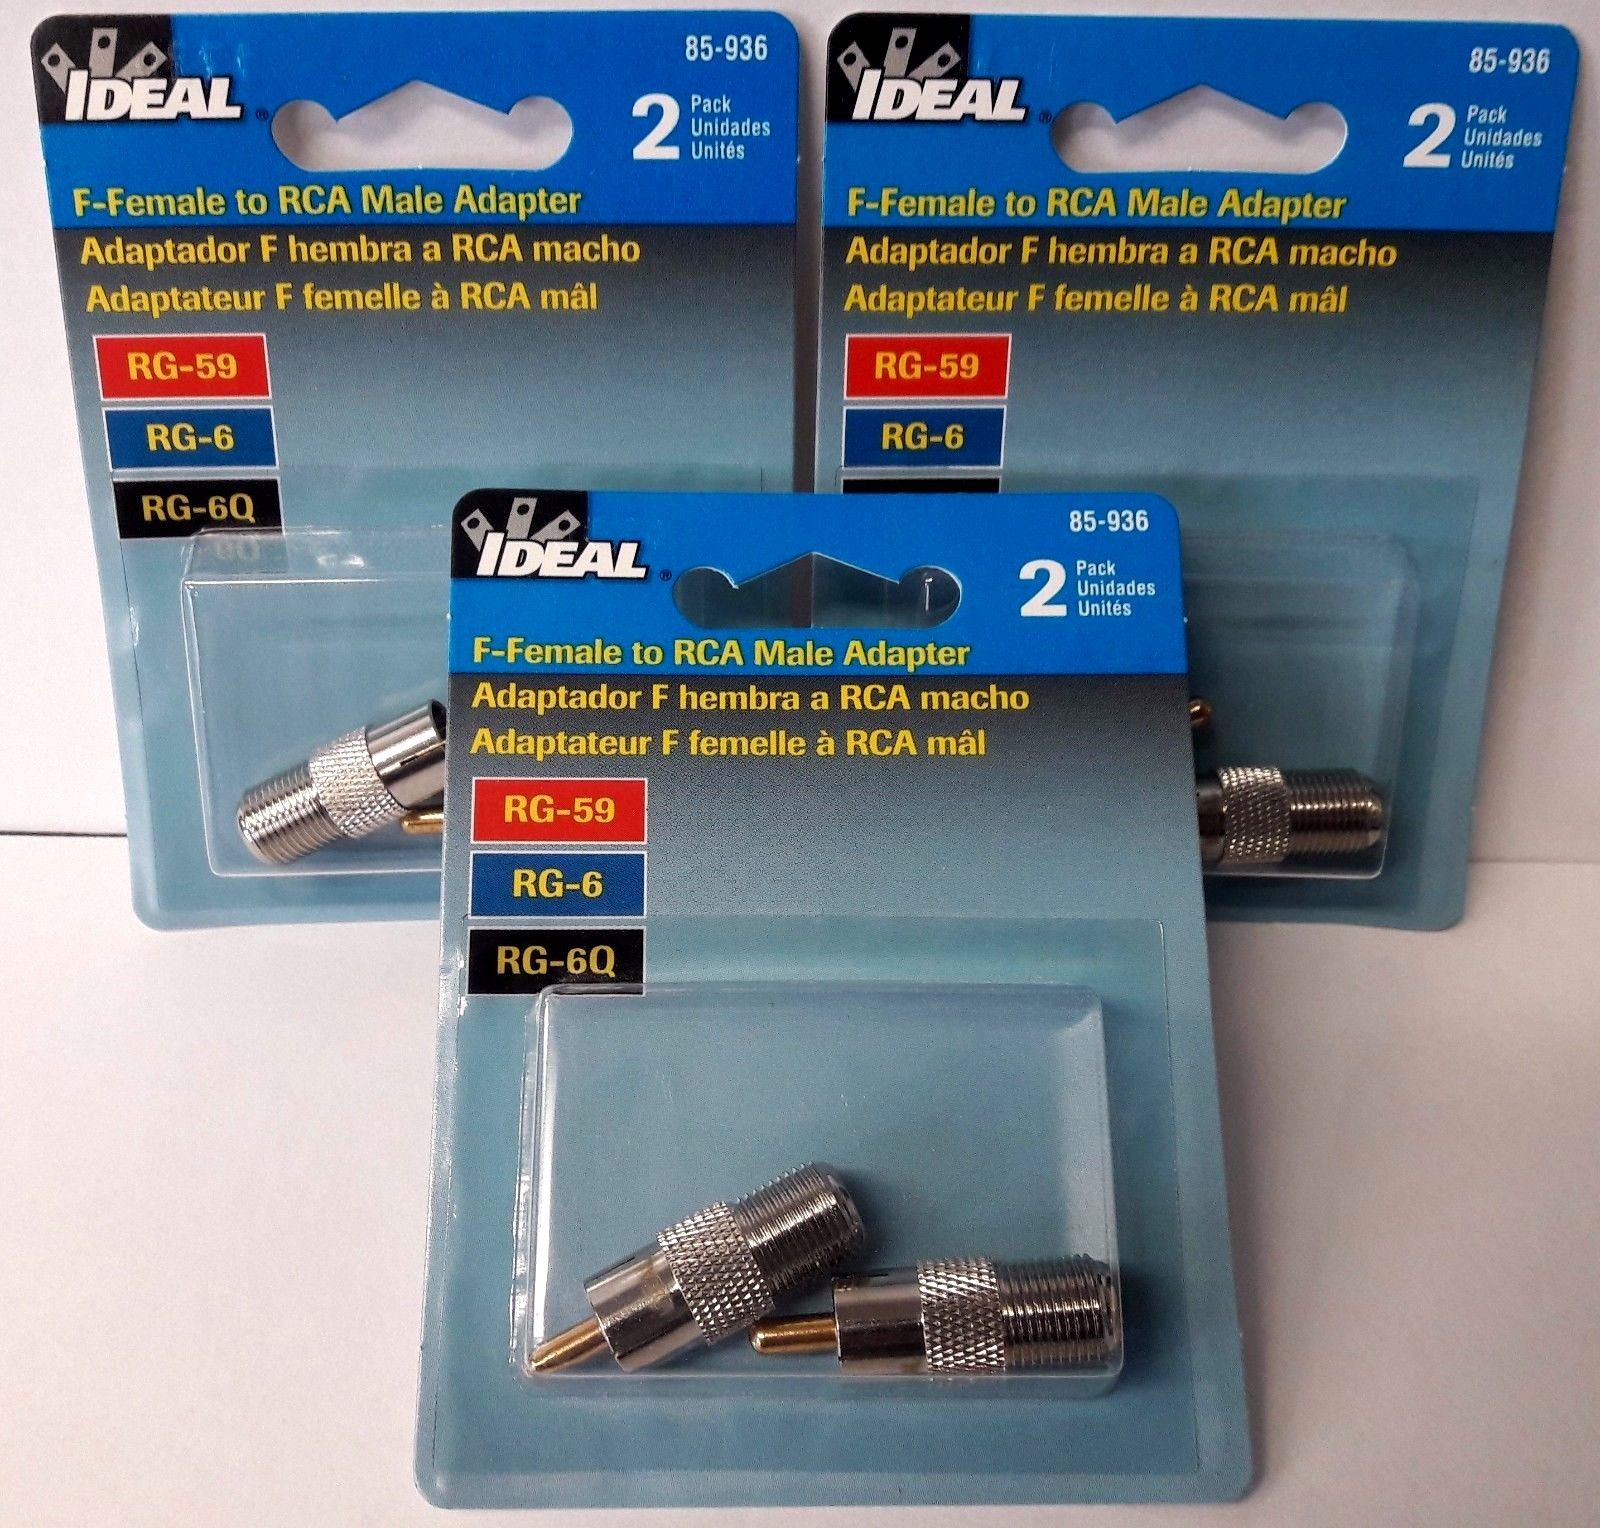 Ideal 85-936 F-Female To Rca Male Adapter 3-2Pks